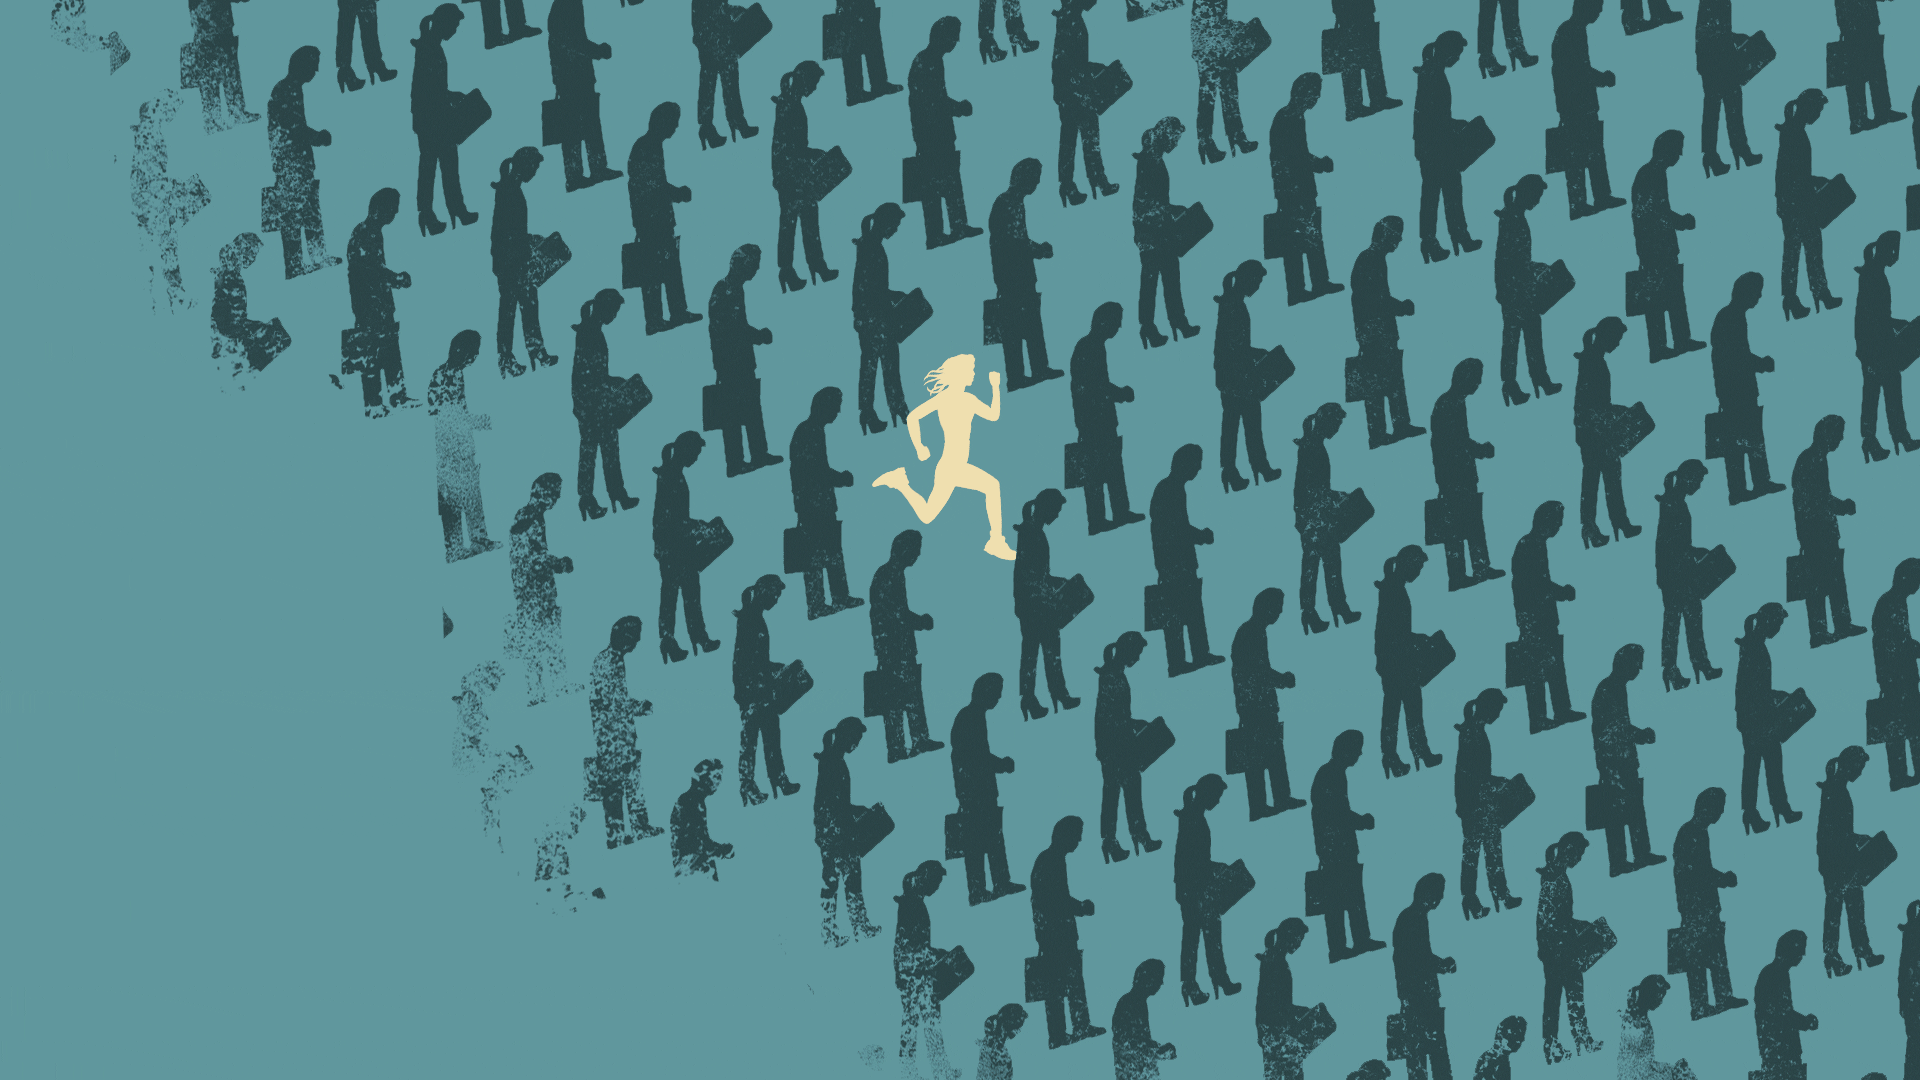 Artwork of a woman running against a repeating pattern of a crowd of office employees, slowly walking to work